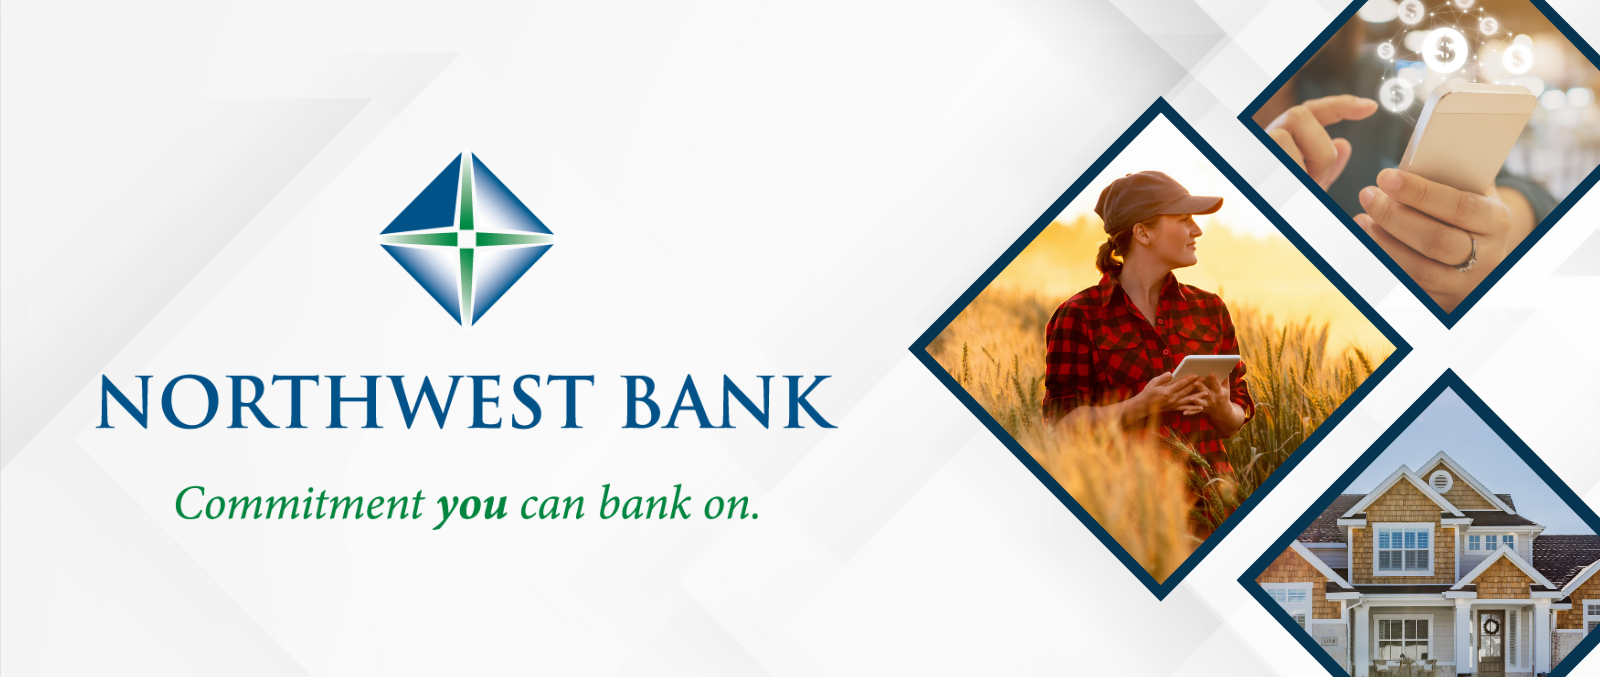 Northwest Bank | Commitment you can bank on.